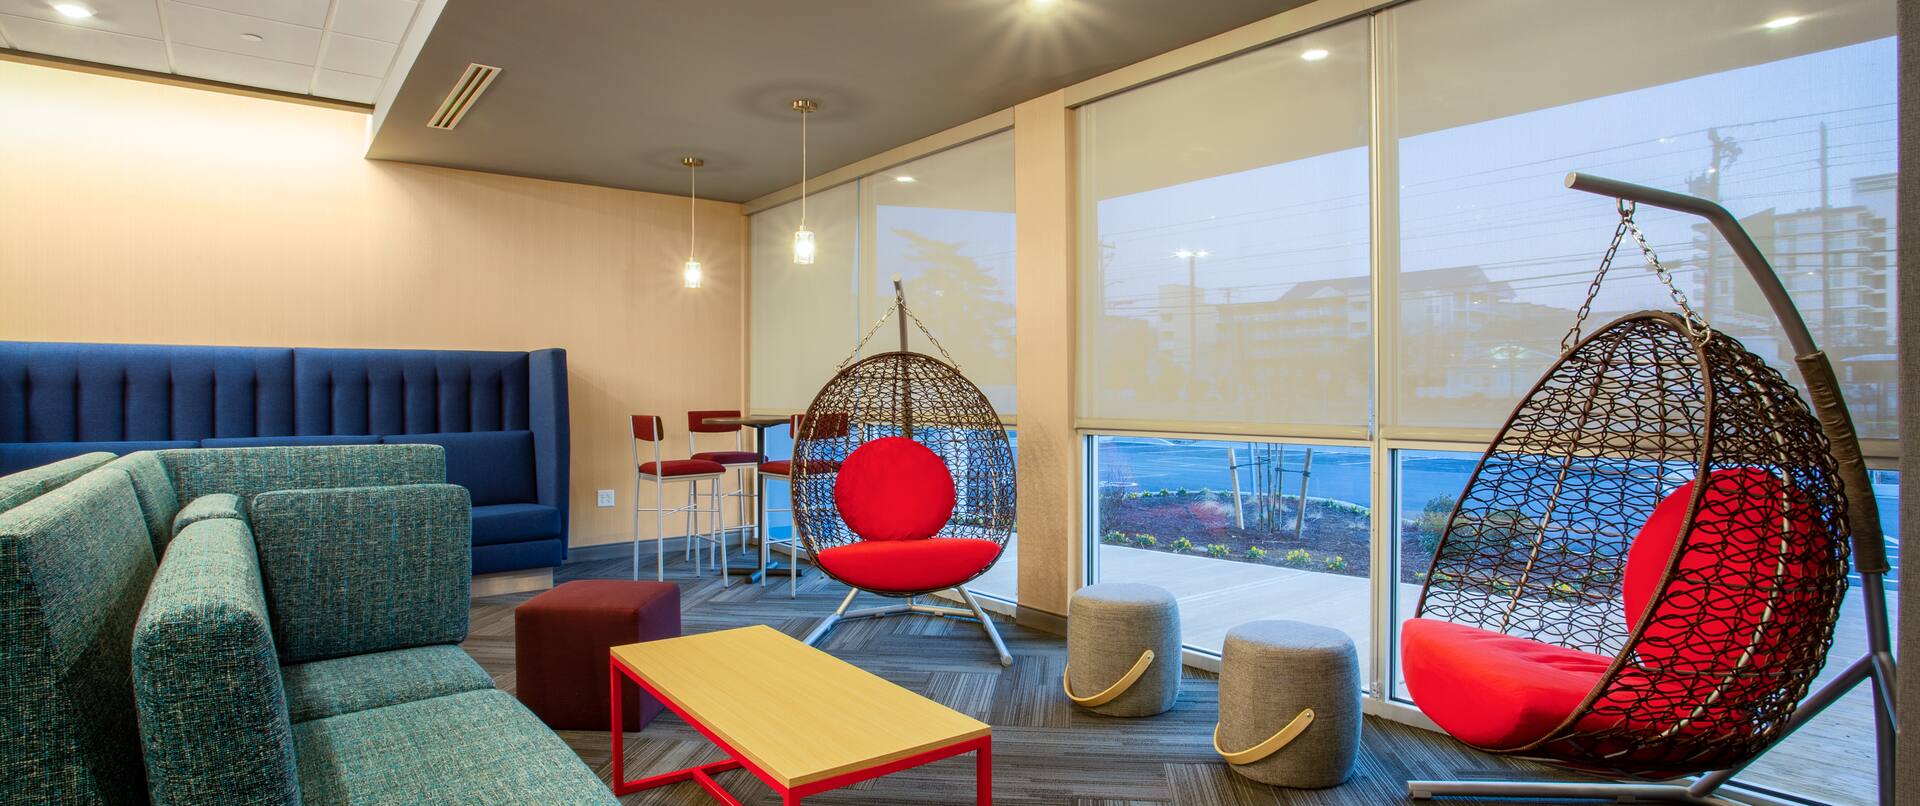 hotel lobby, seating area, hanging chairs